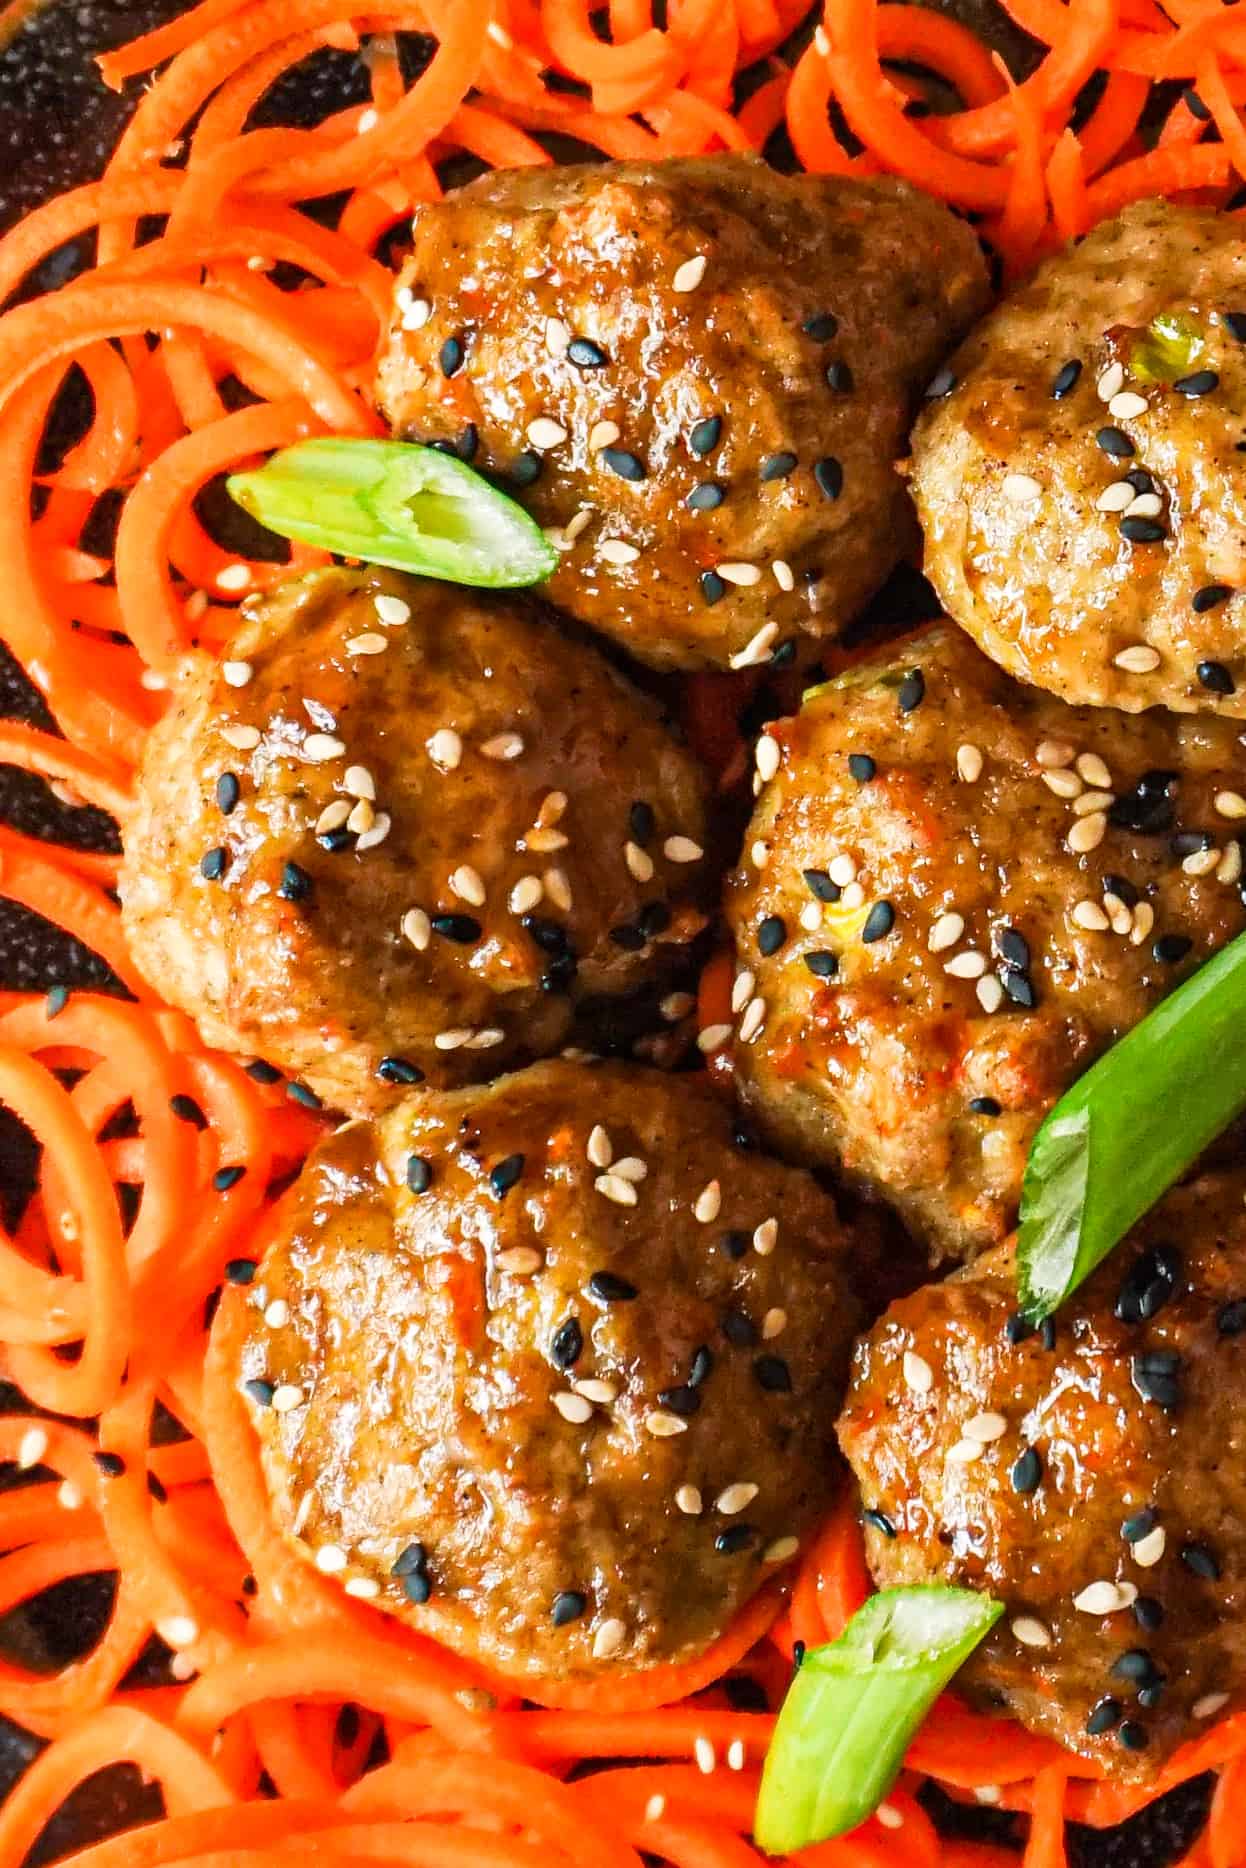 Chinese Chicken Meatballs ontop of spiralized carrots